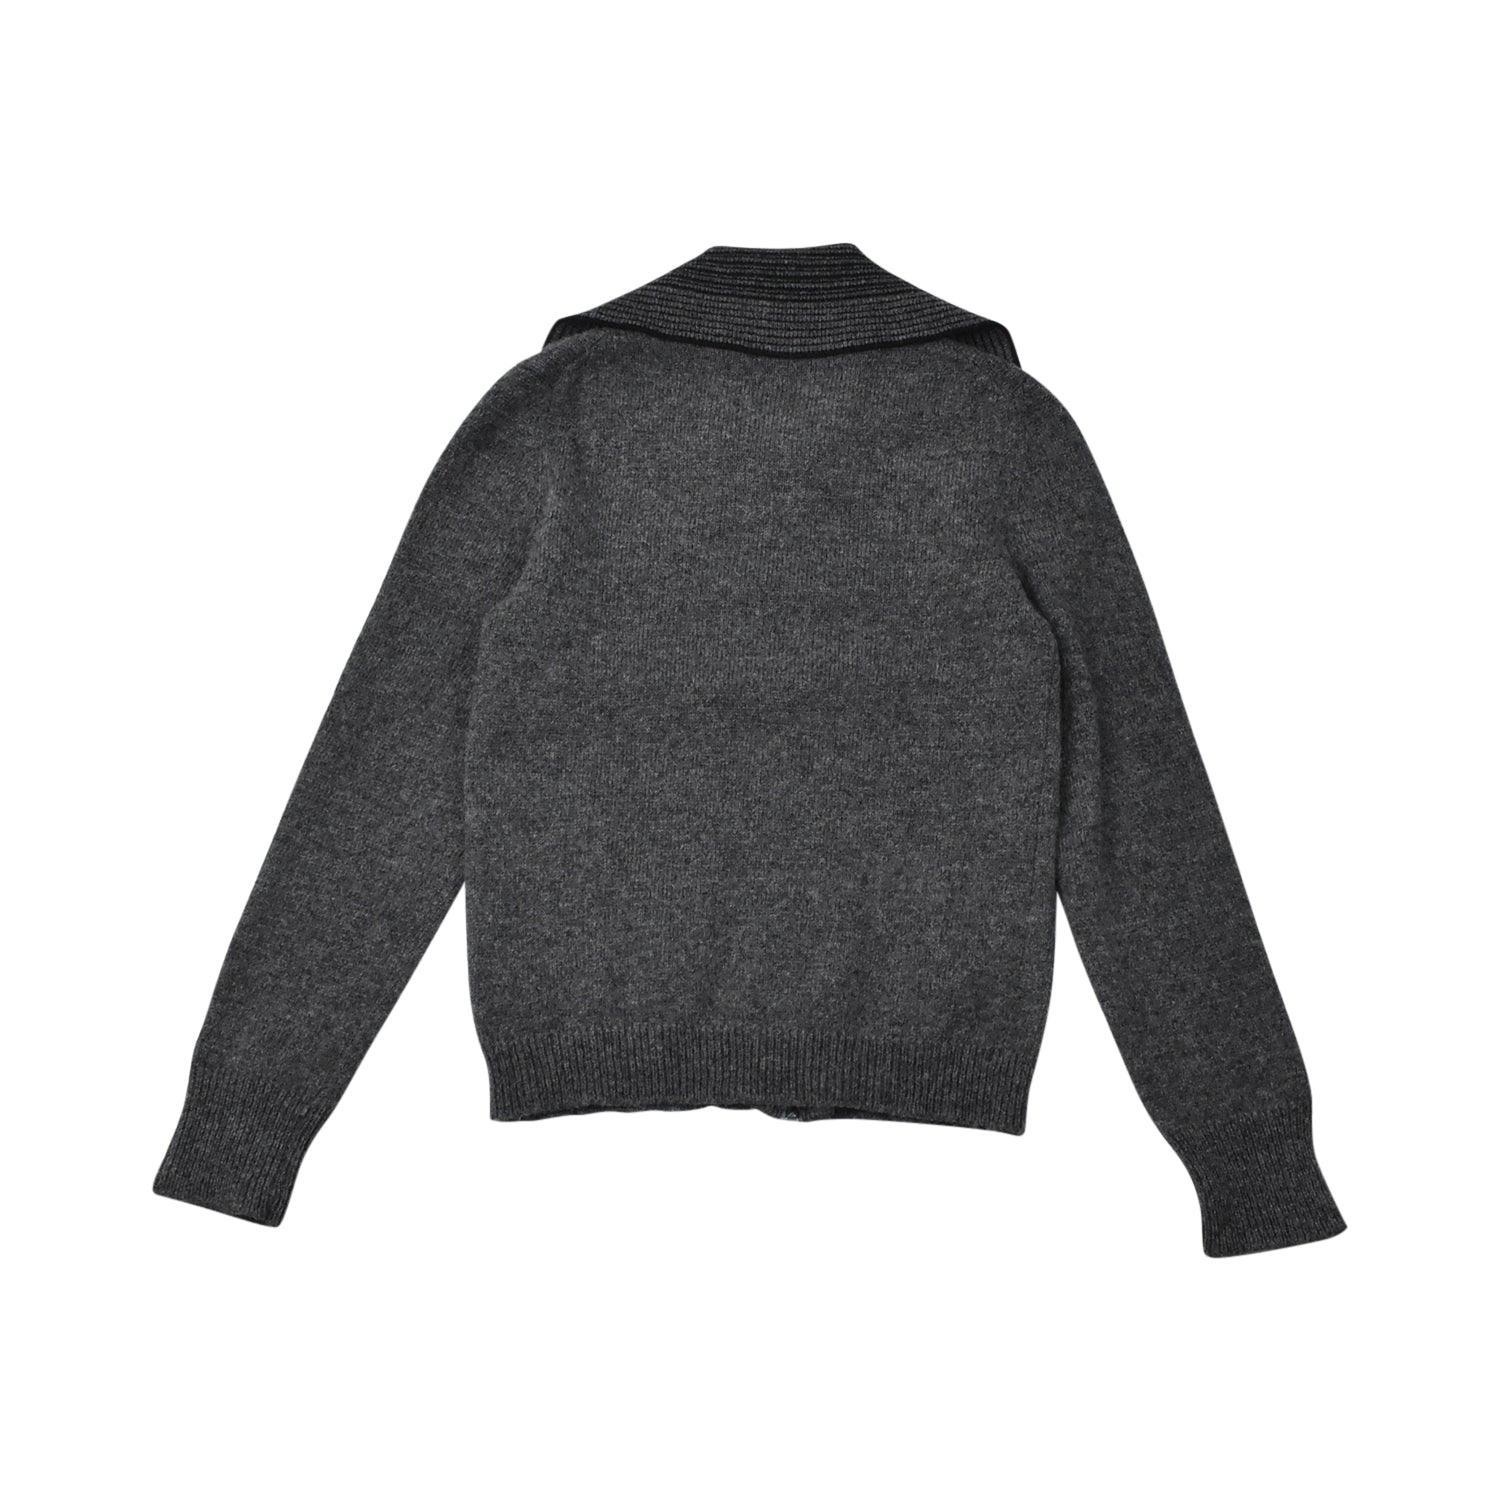 Dior Homme Sweater - Men's M - Fashionably Yours